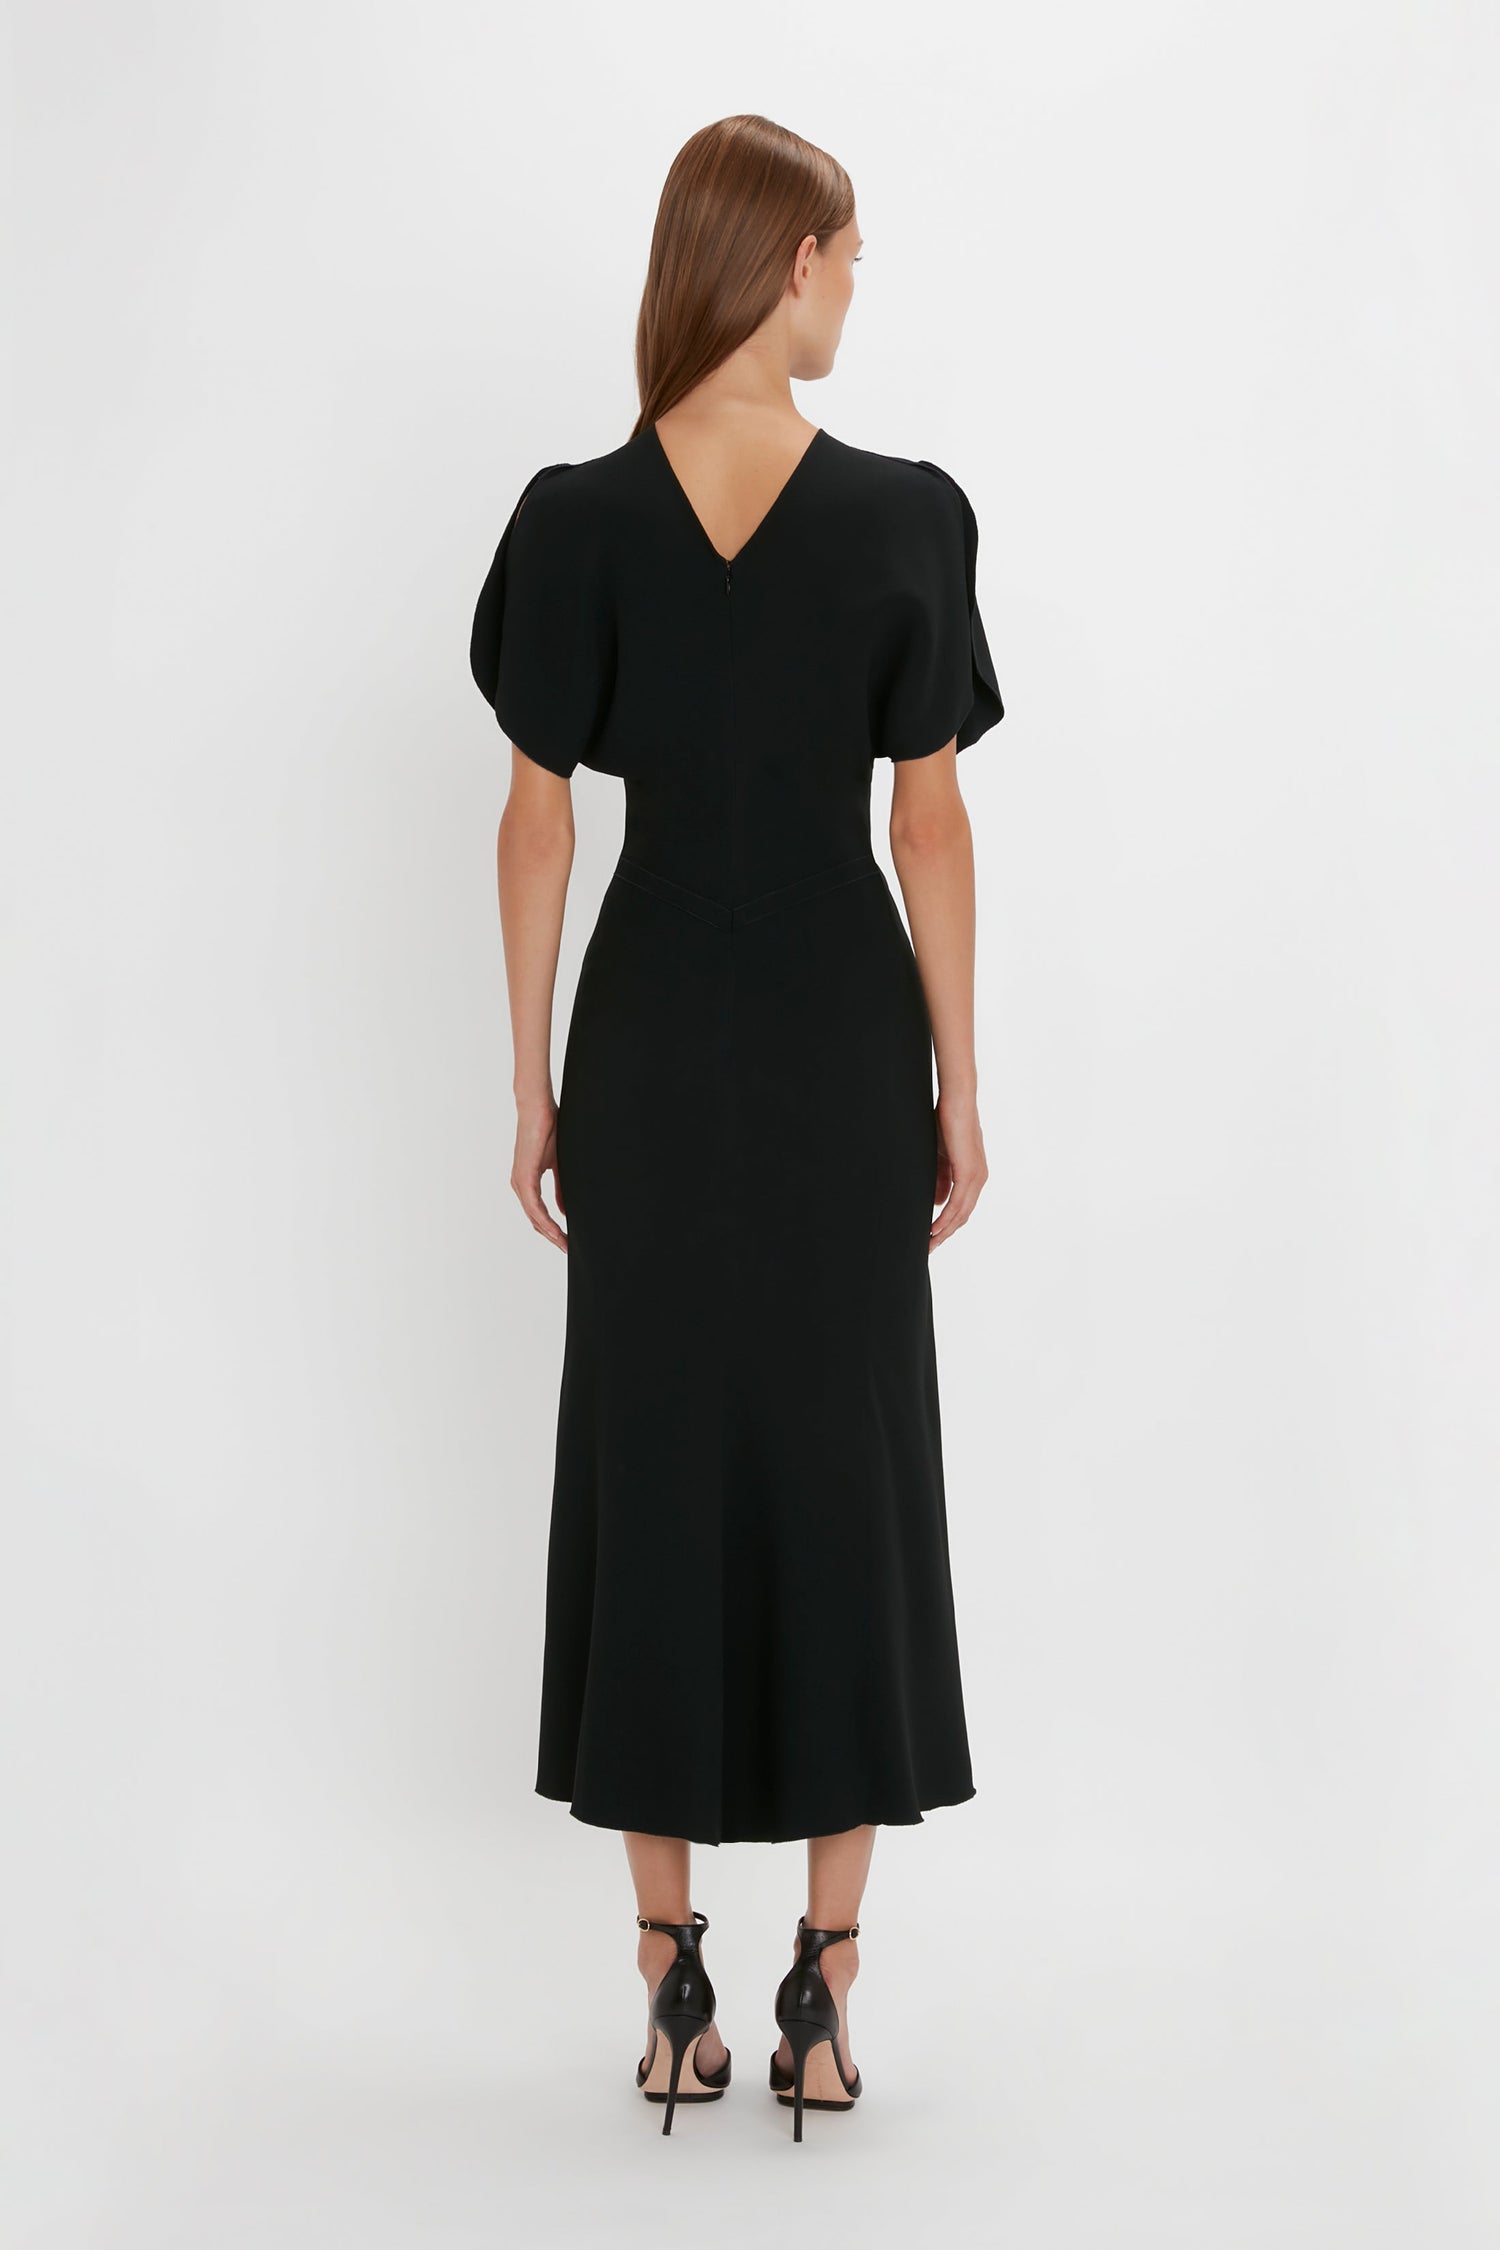 A woman stands facing away, wearing a black Victoria Beckham Gathered Waist Midi Dress with short sleeves and a v-shaped neckline at the back. She is also wearing black pointy-toe stiletto shoes.